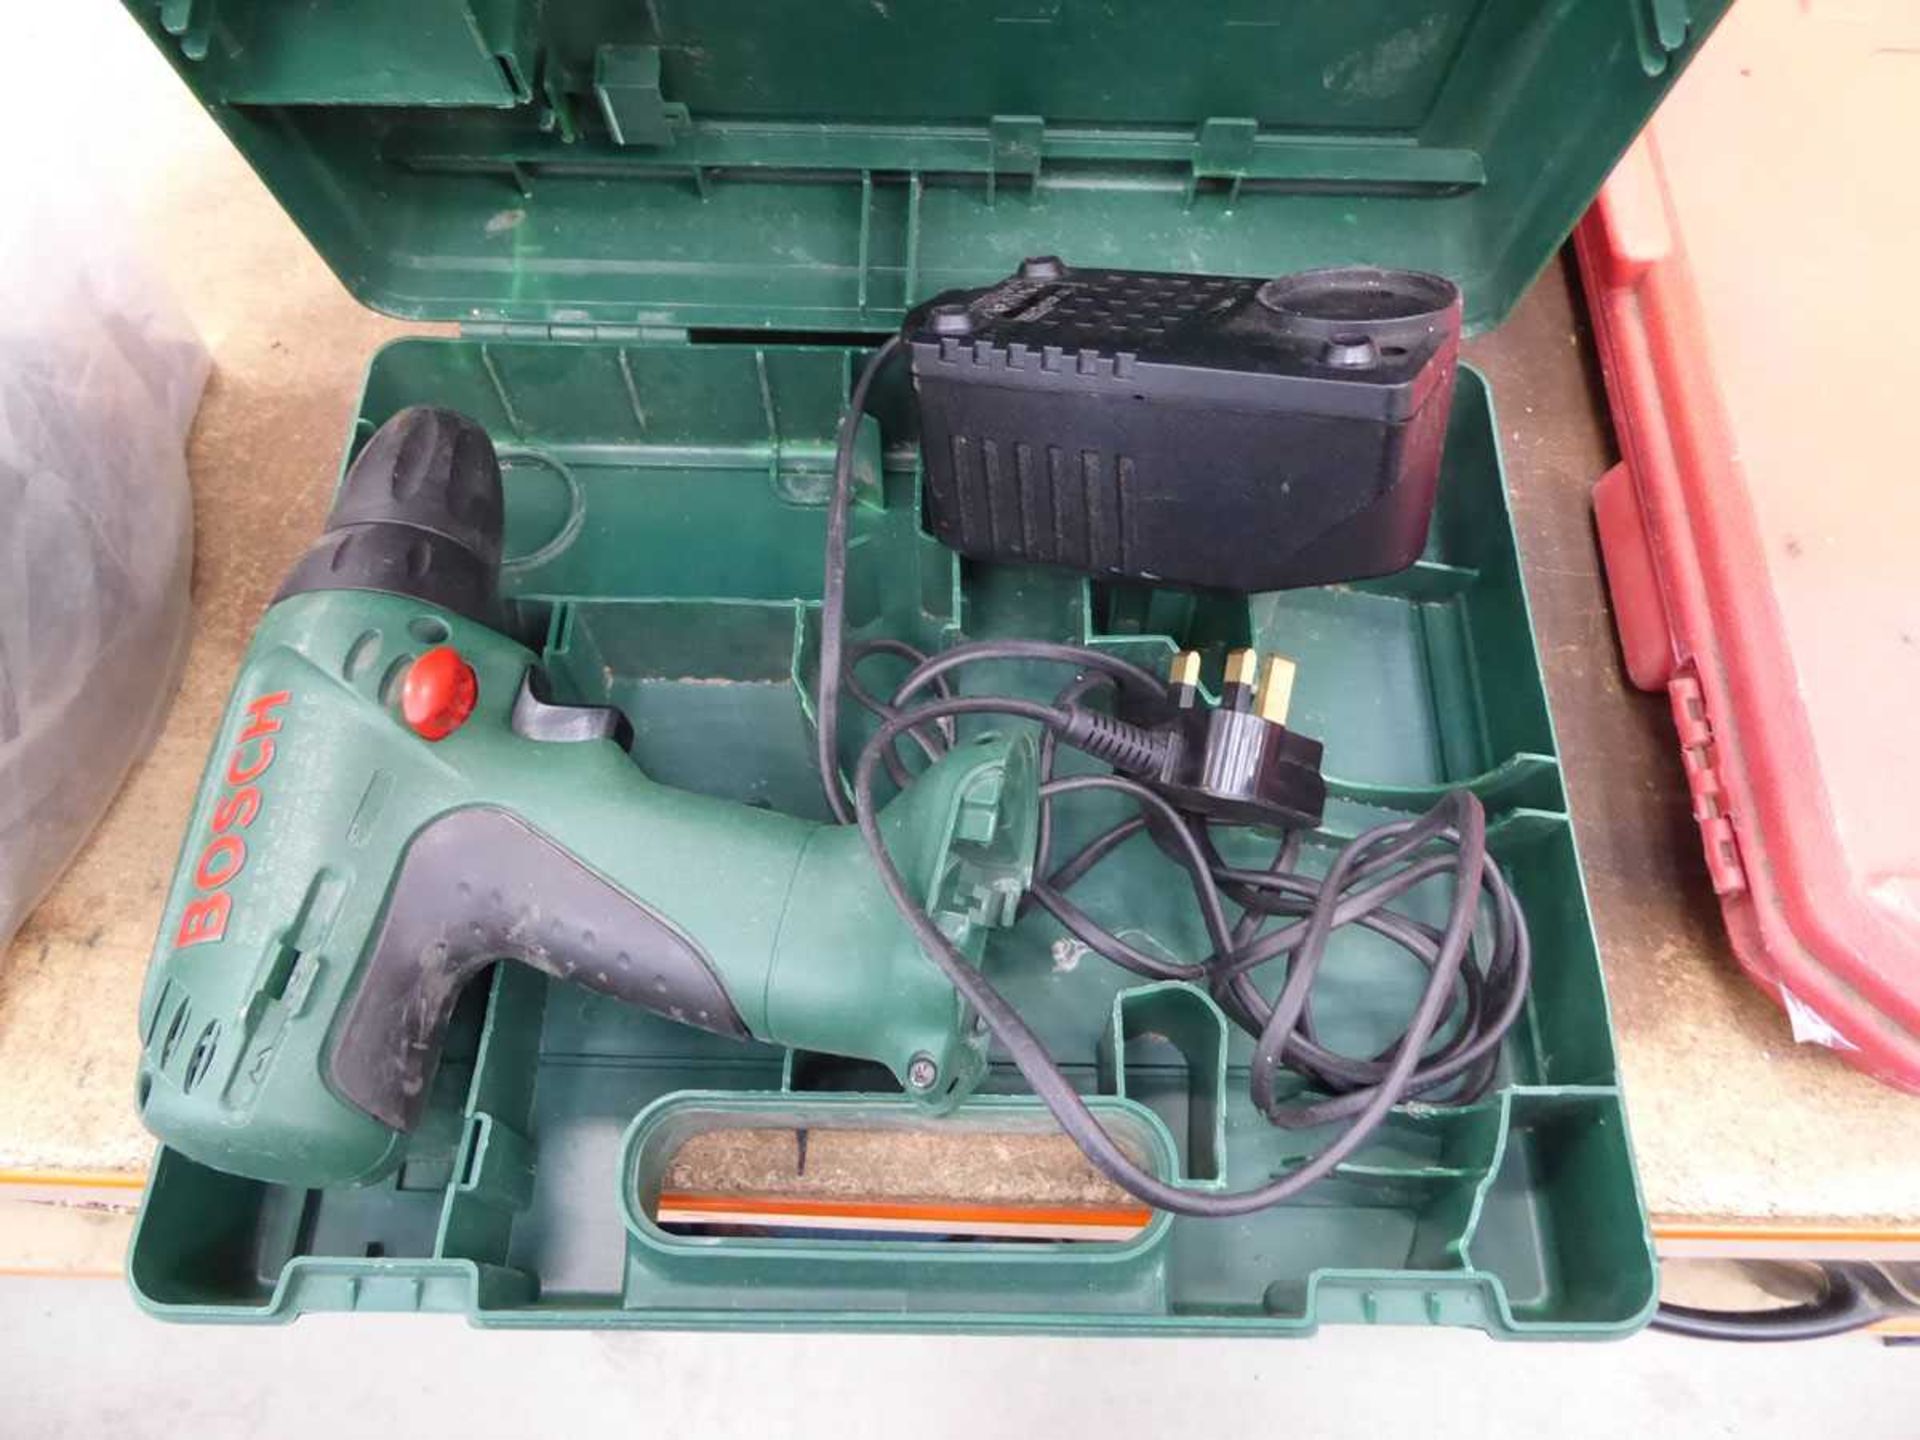 Bosch battery drill - no battery, 1 charger - Image 2 of 2